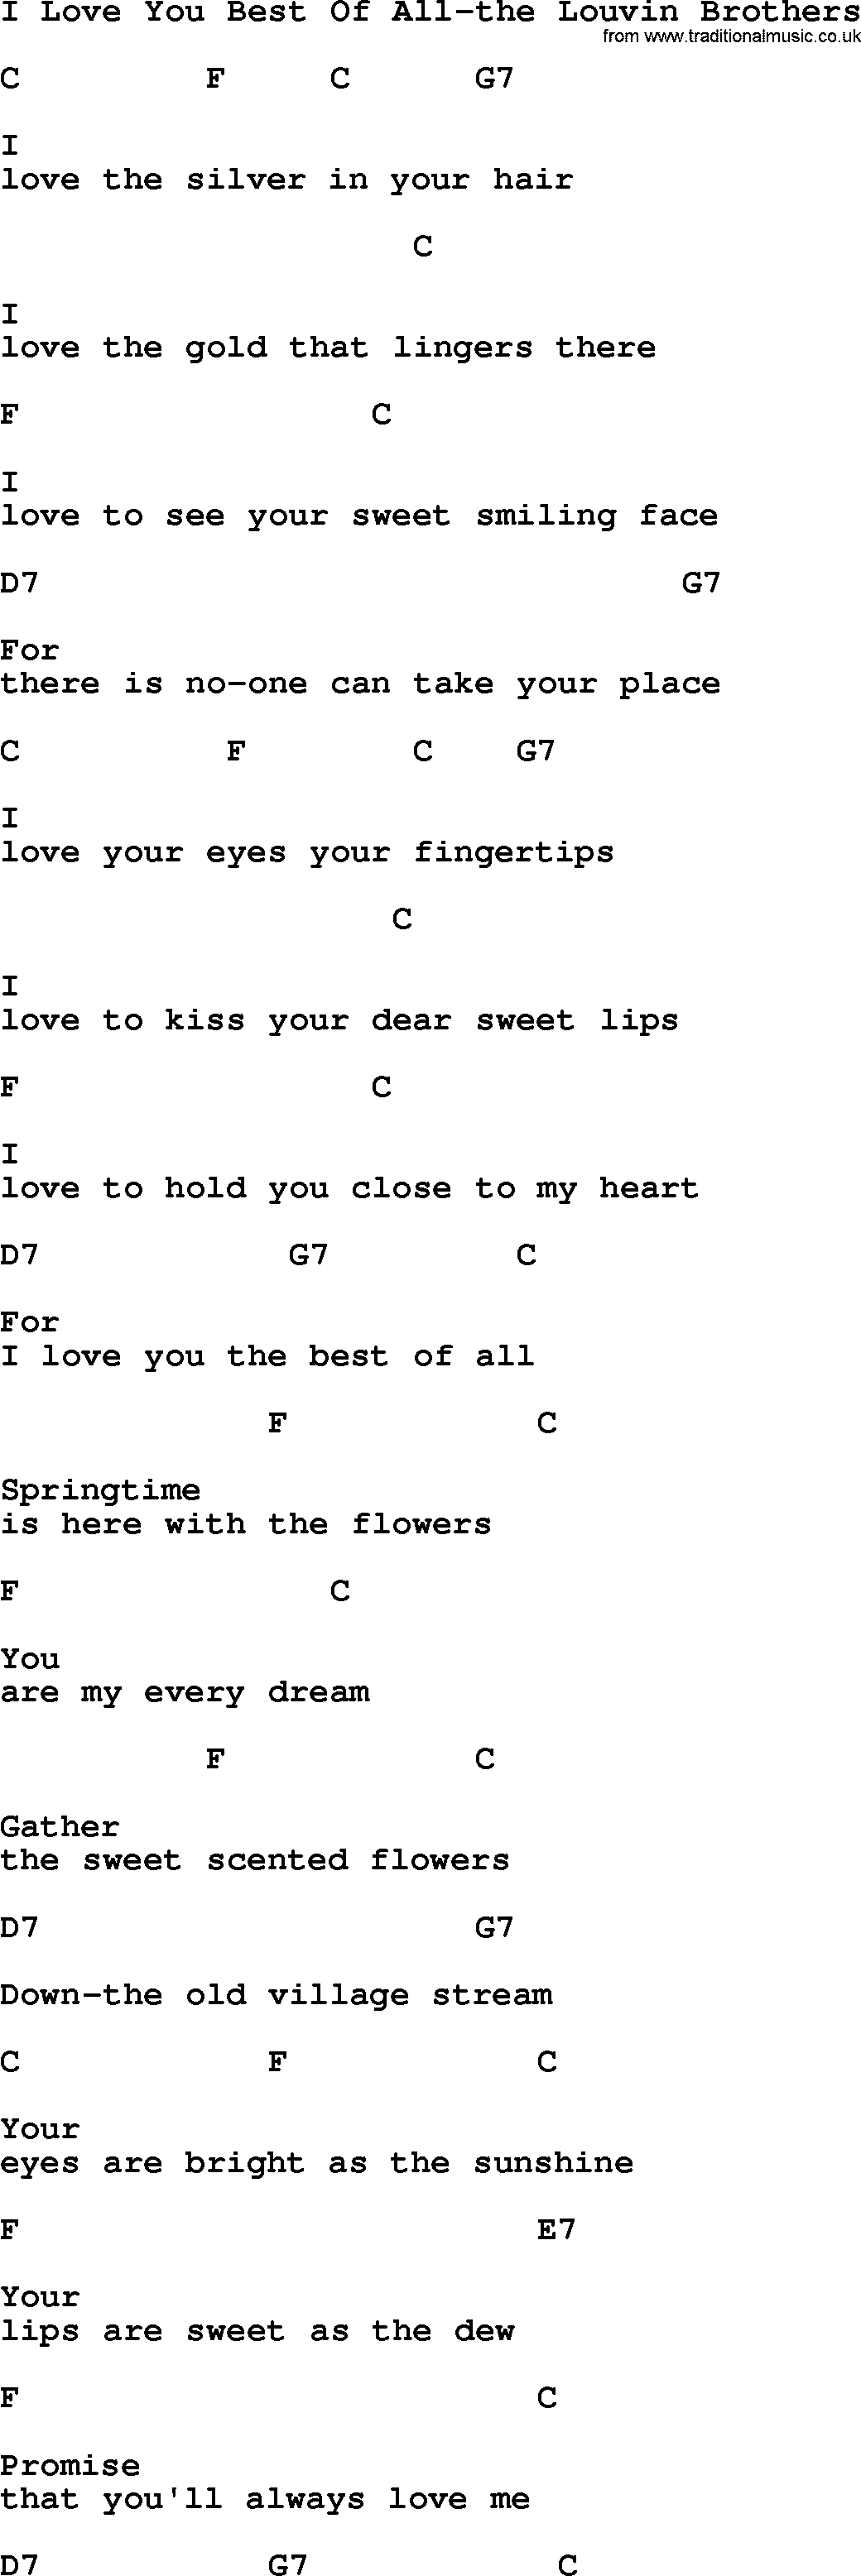 Country music song: I Love You Best Of All-The Louvin Brothers  lyrics and chords